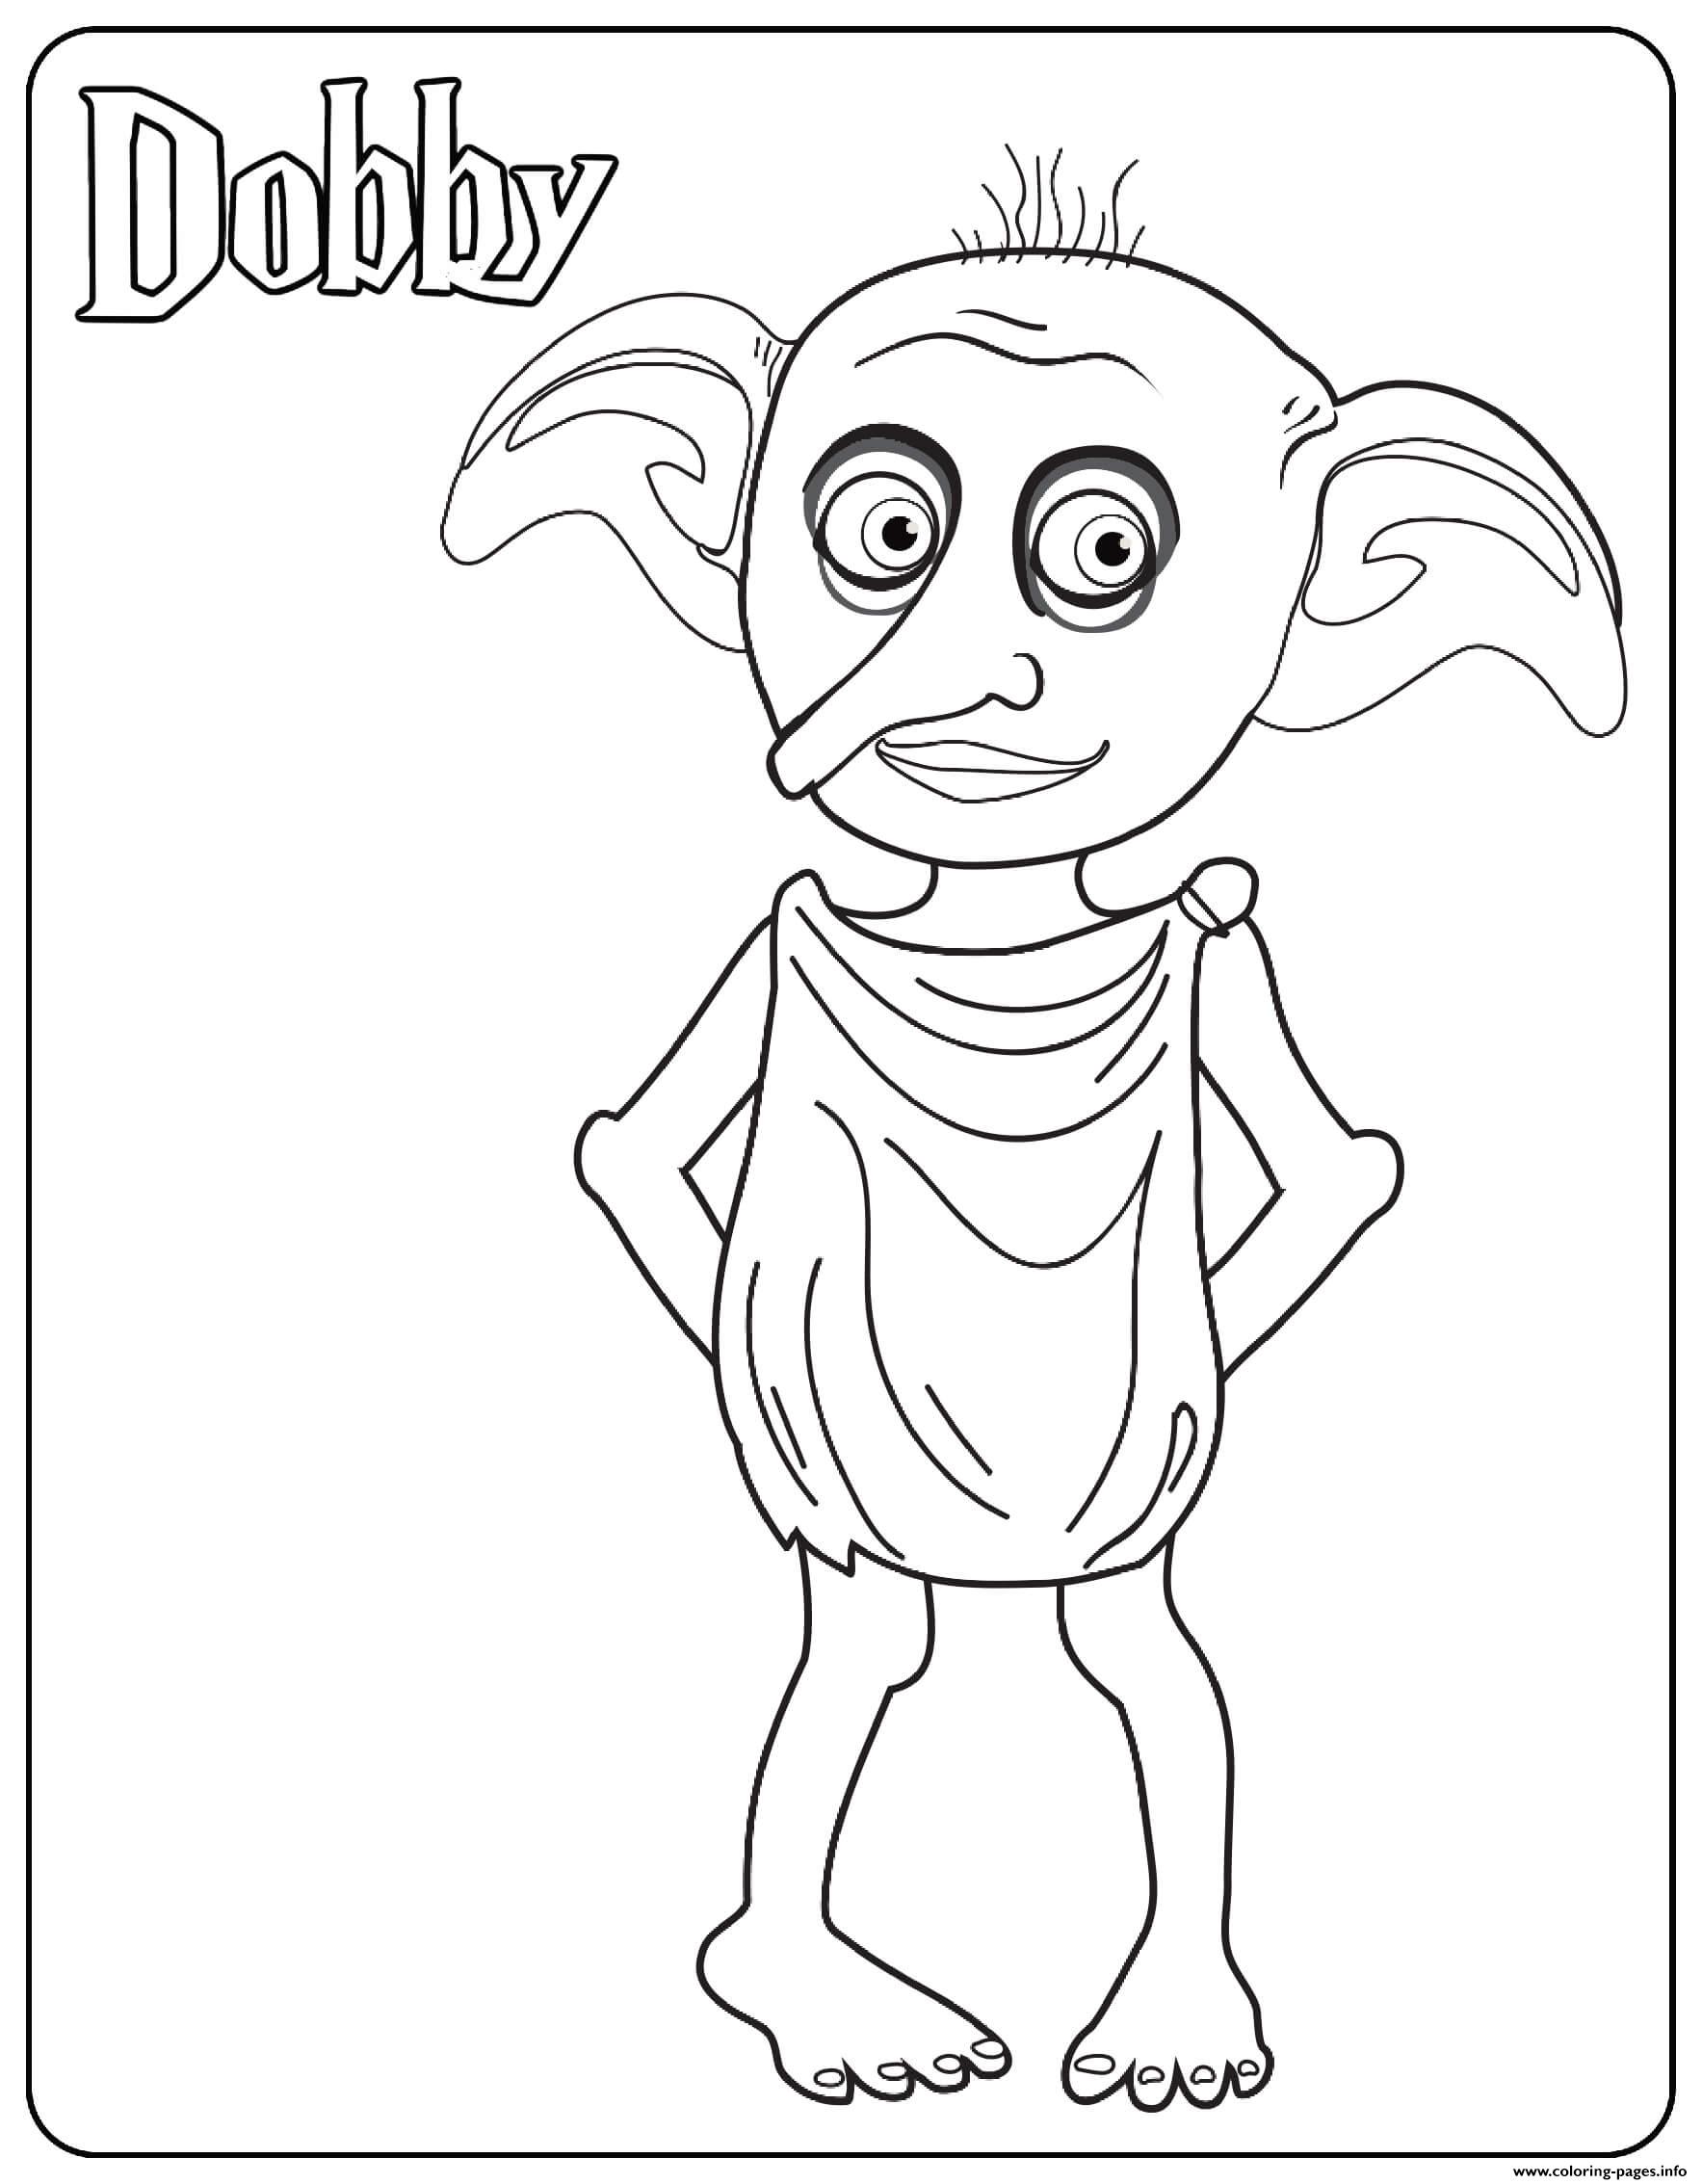 Dobby coloring